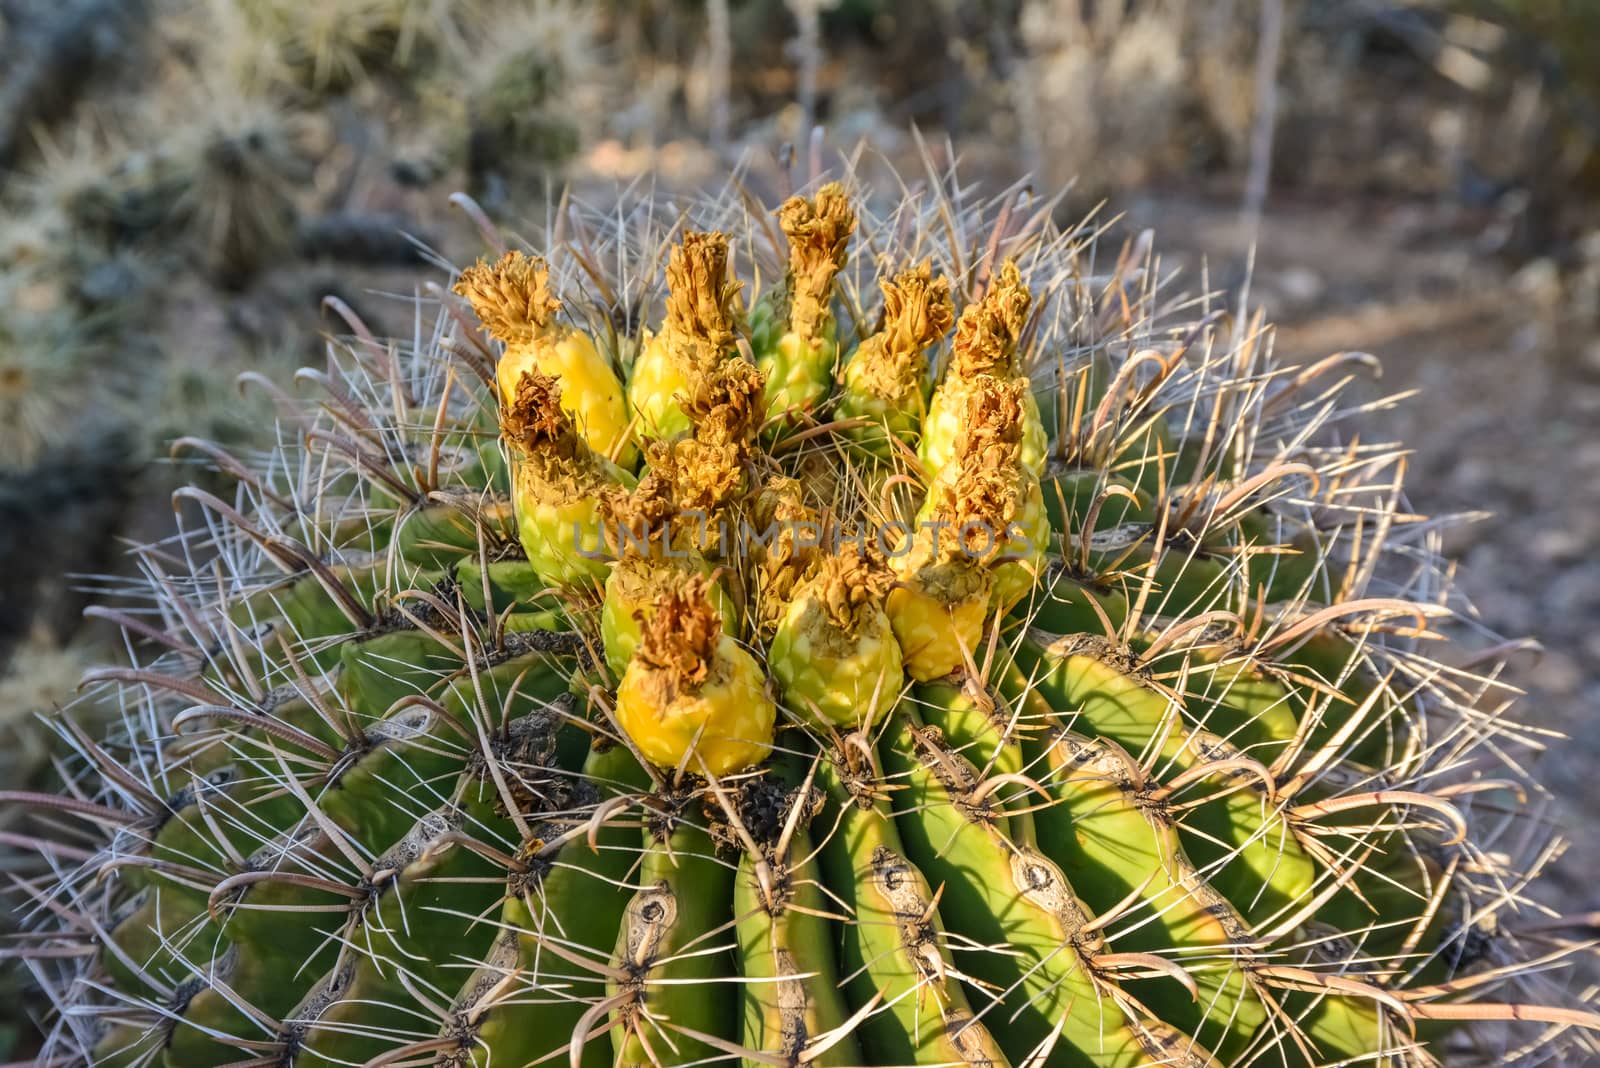 Yellow fruits with seeds on top of a large cactus Ferocactus. by Hydrobiolog